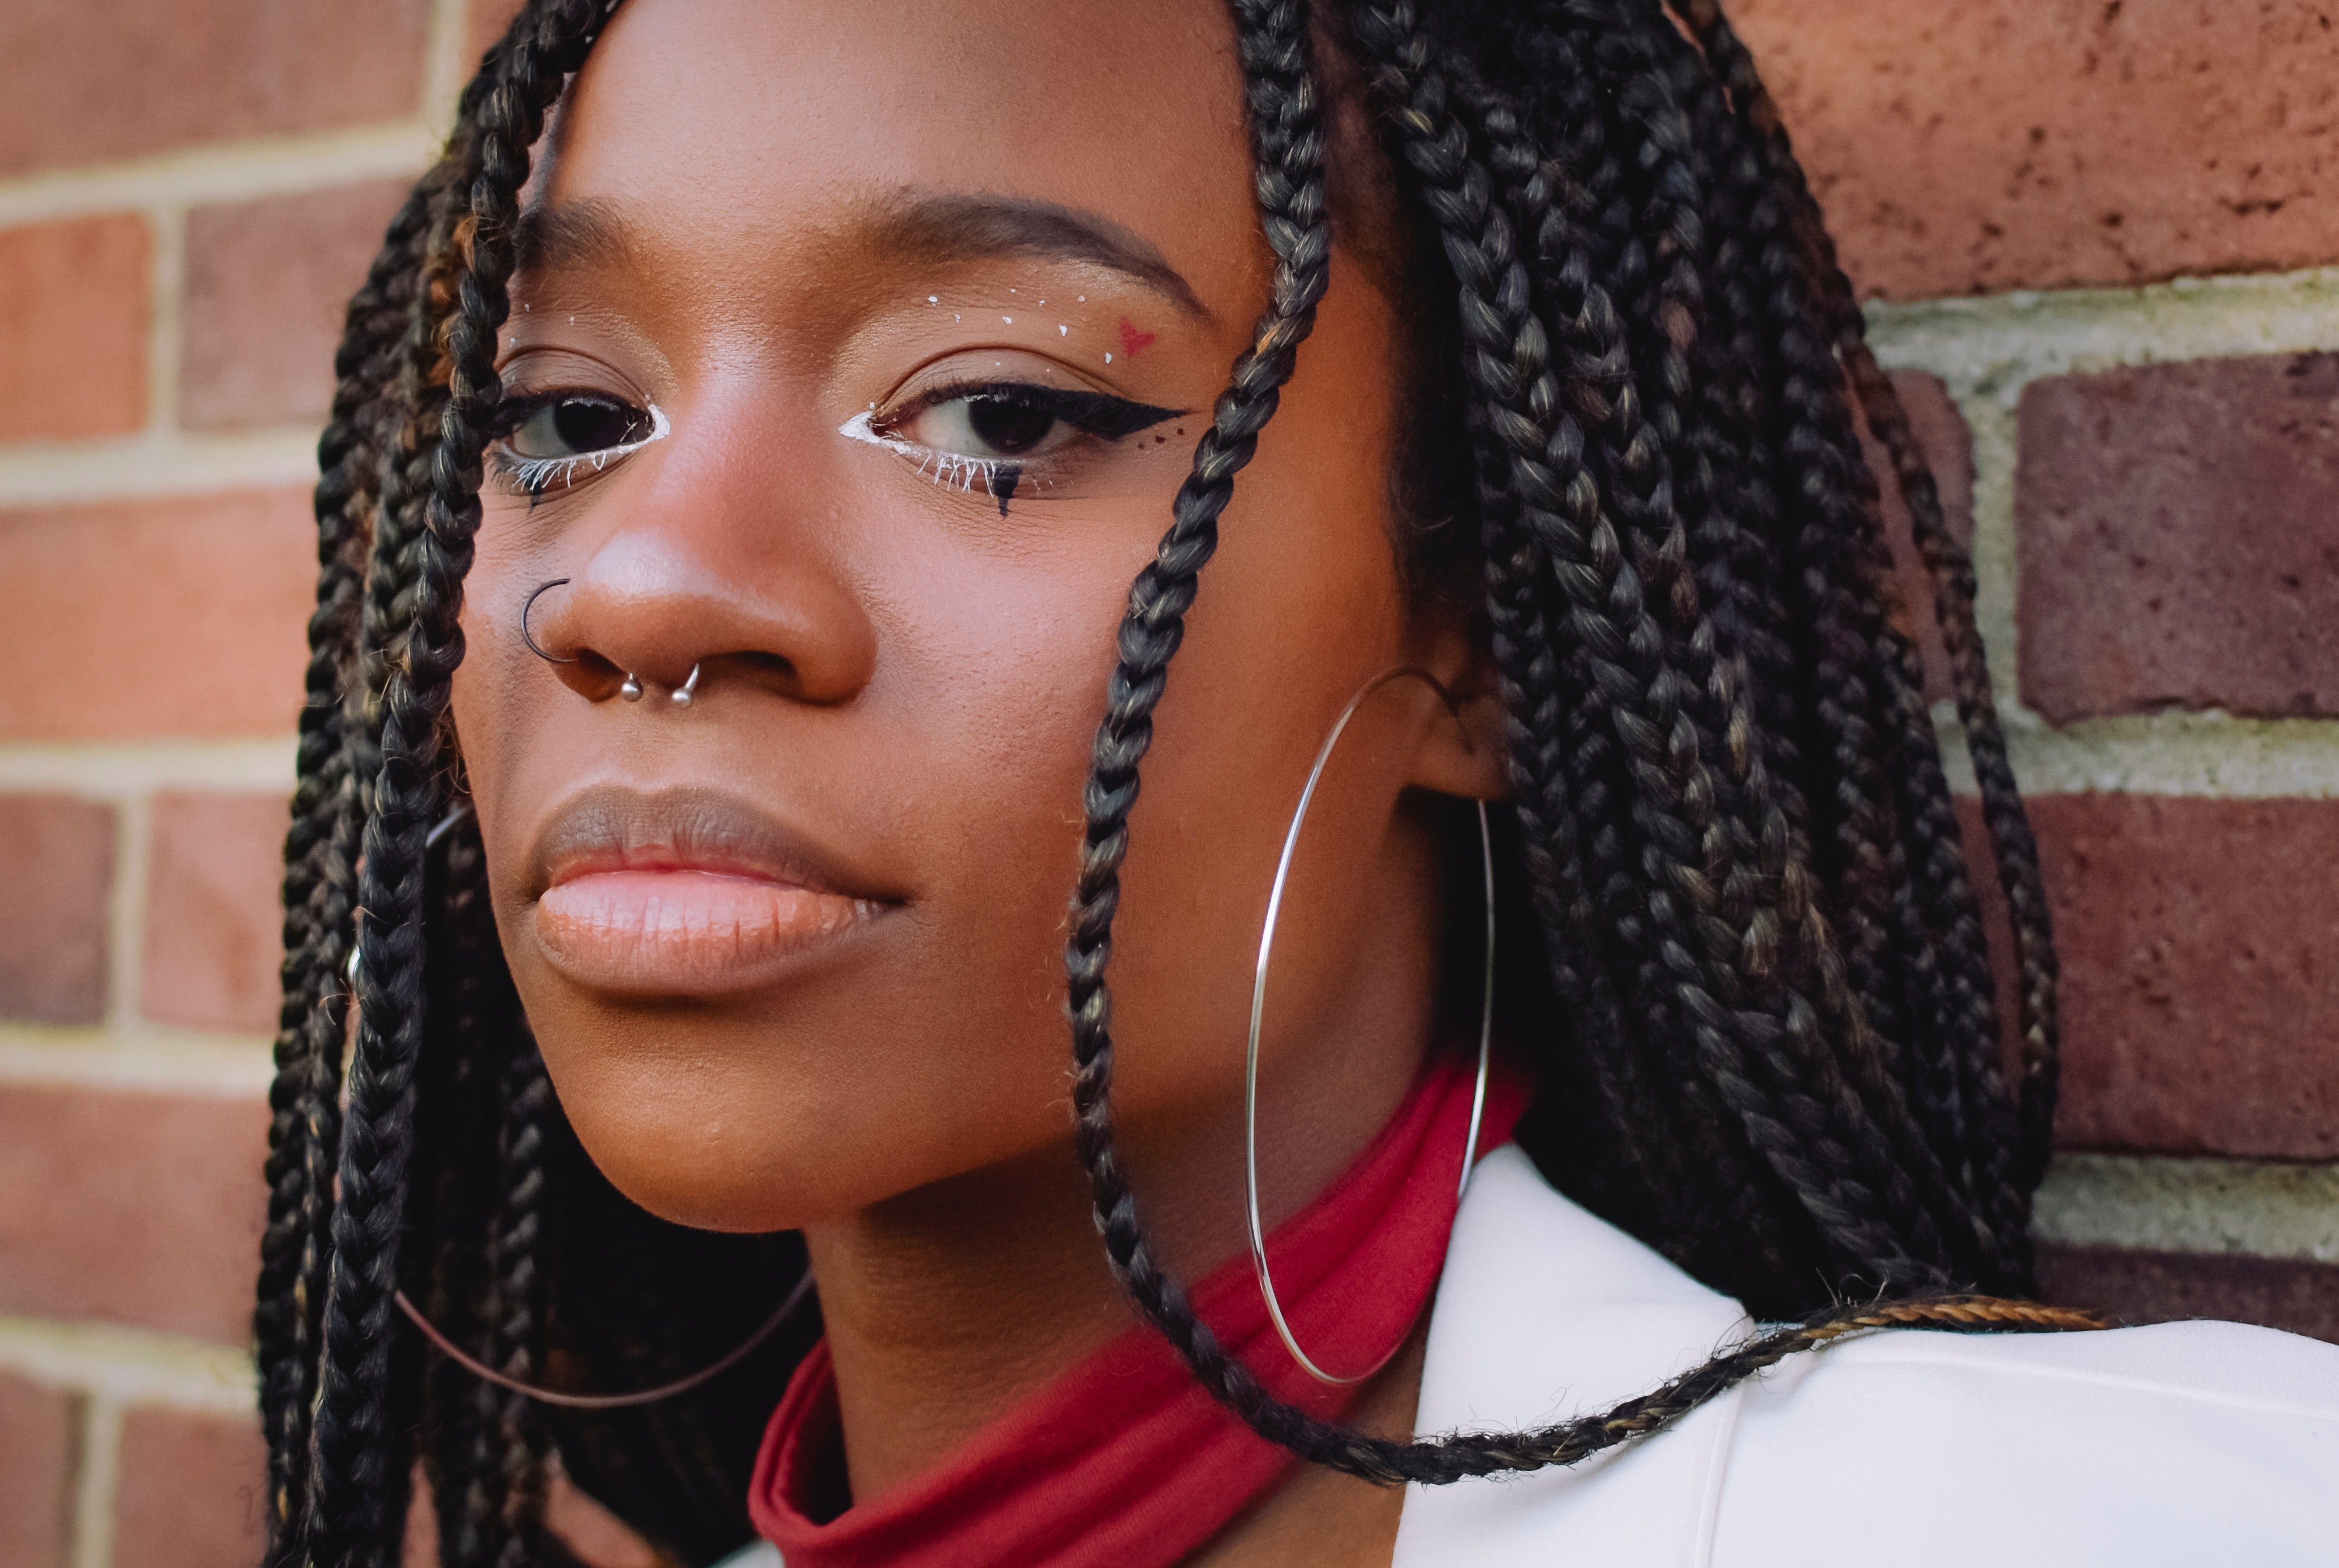 A woman with septum piercing ring | Source: Pexels